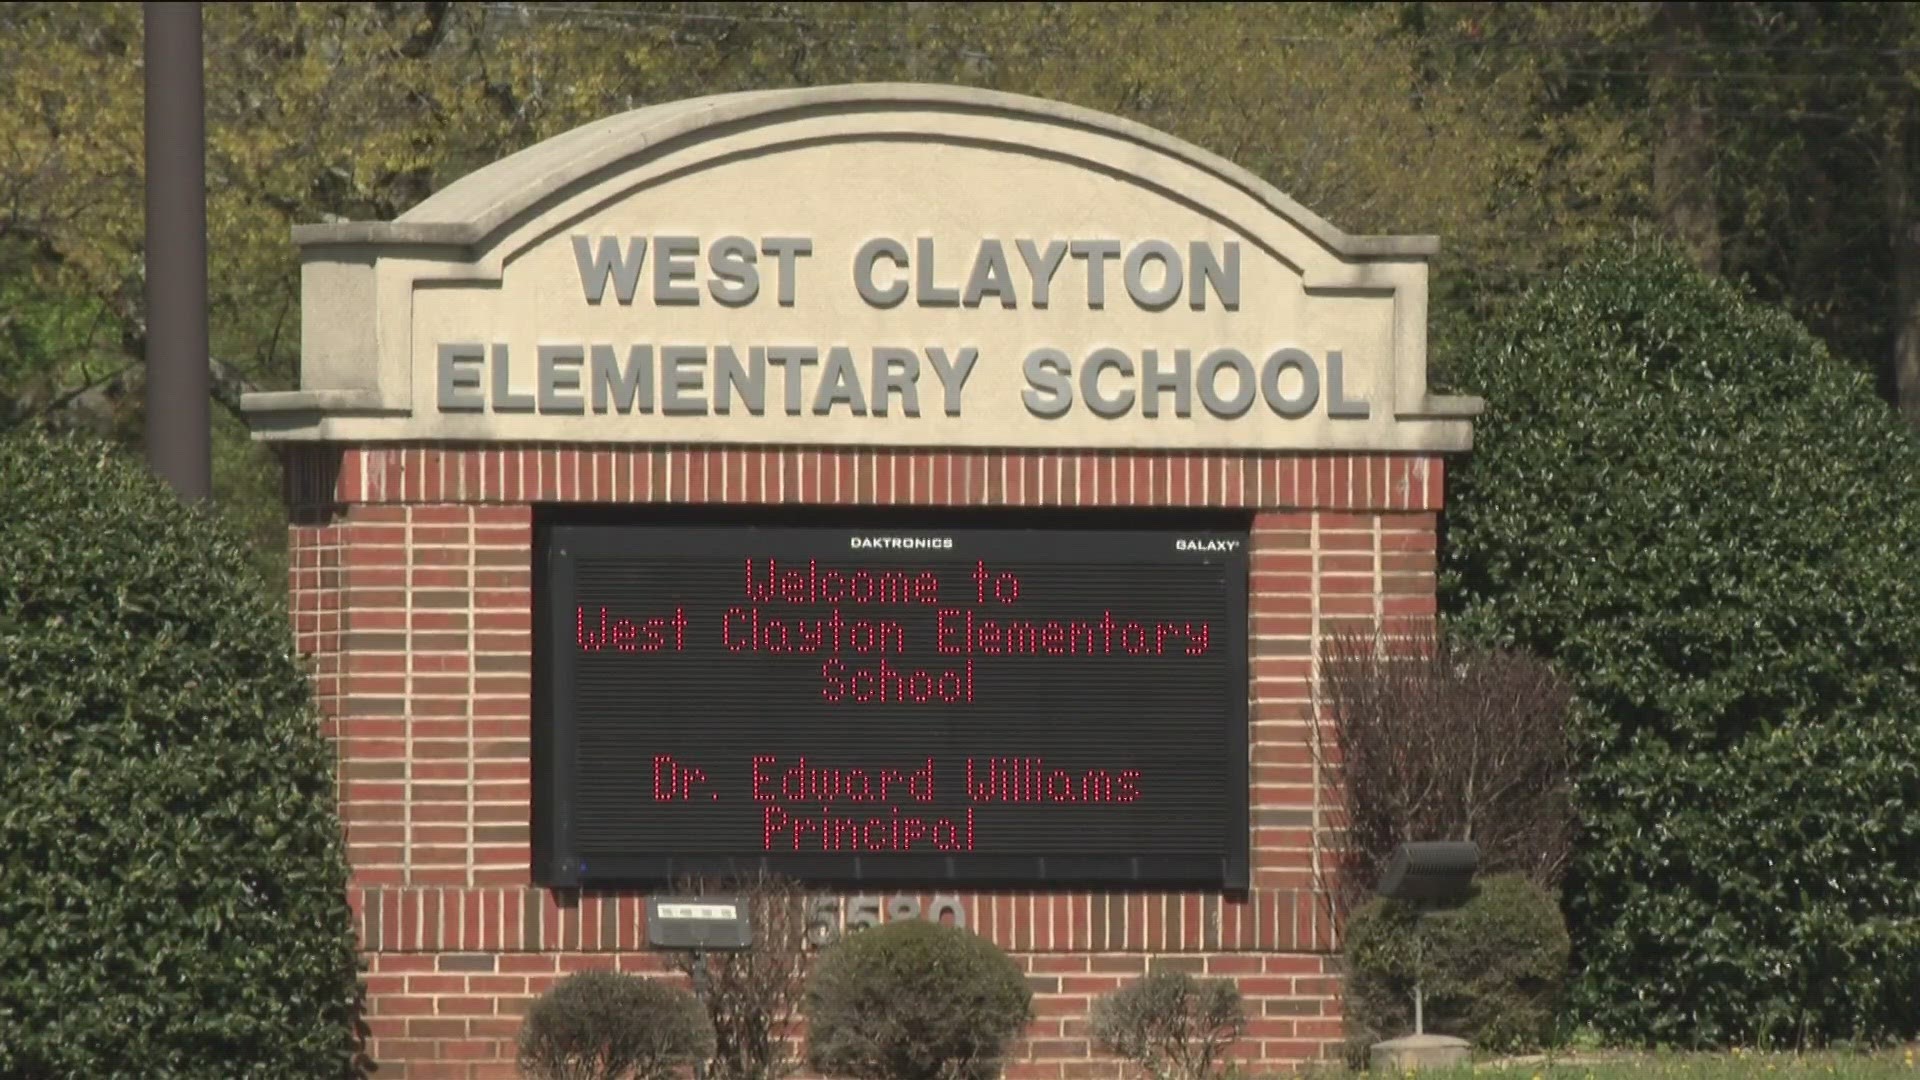 The district is considering virtual learning on campus to separate students who may be caught in trouble in an effort to avoid suspensions.